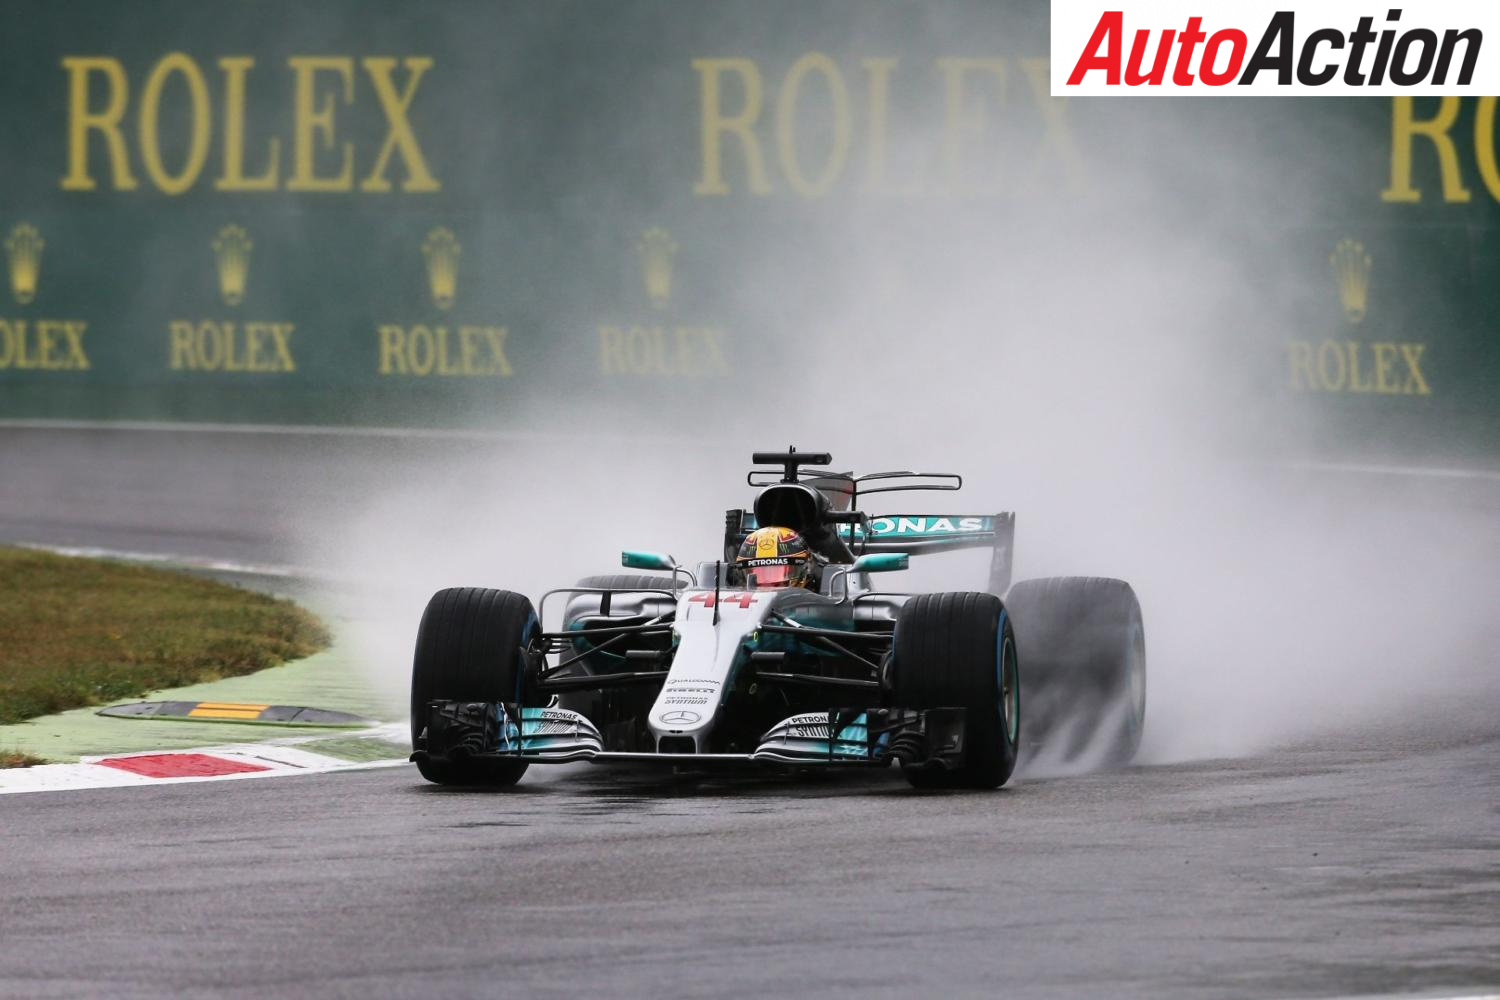 Lewis Hamilton made the most of extremely tricky conditions to qualify fastest for the Italian Grand Prix - Photo: LAT